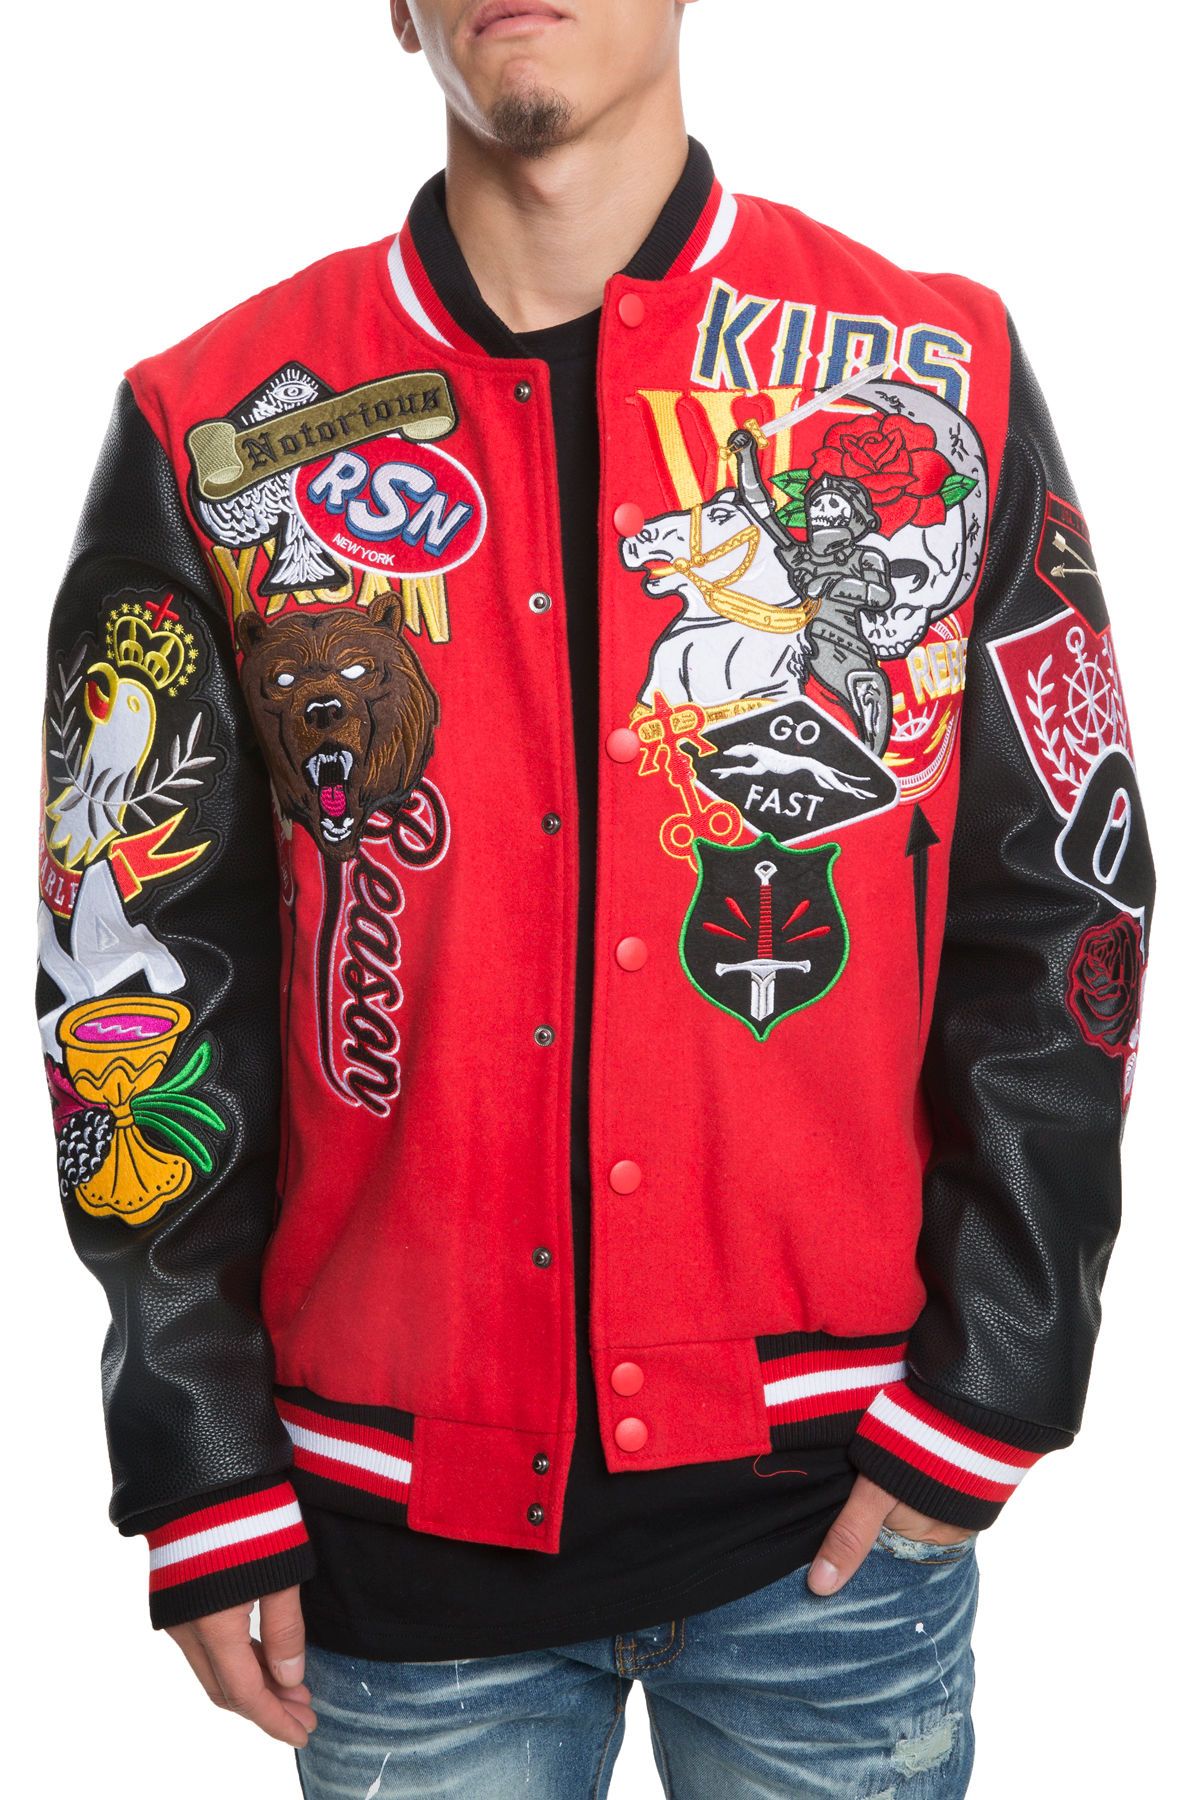 REASON The Reginals Varsity Jacket in Red and Black H9-222-R-RED - Shiekh